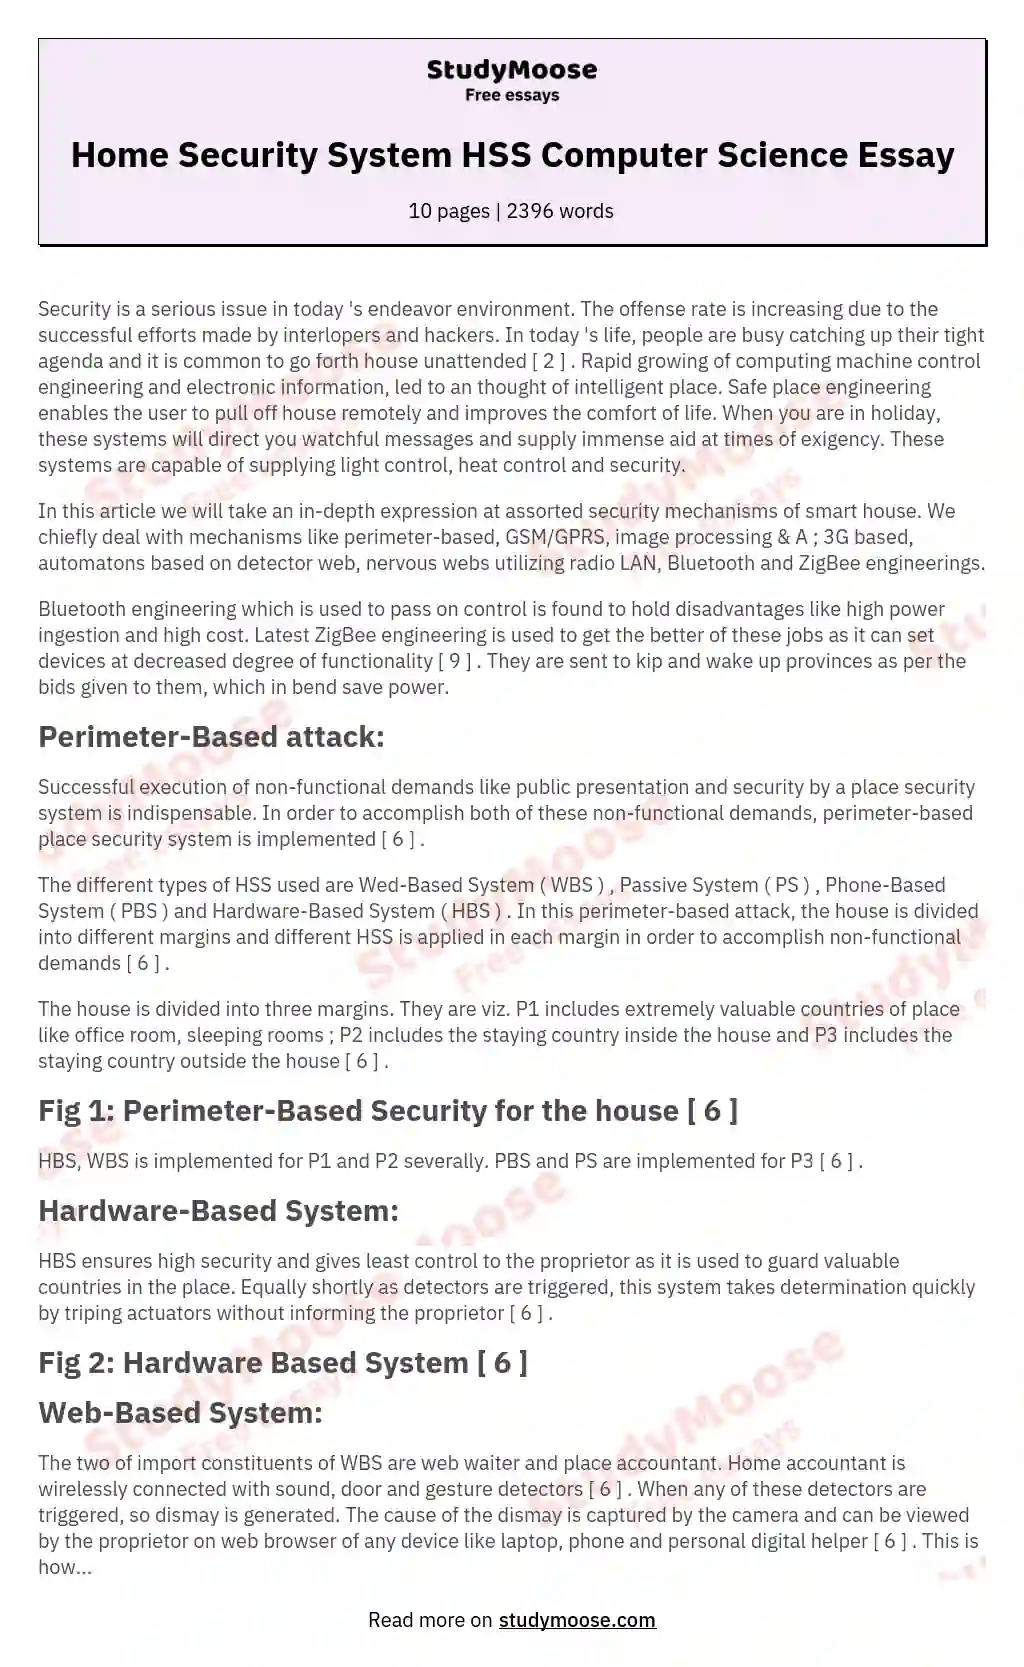 Home Security System HSS Computer Science Essay essay